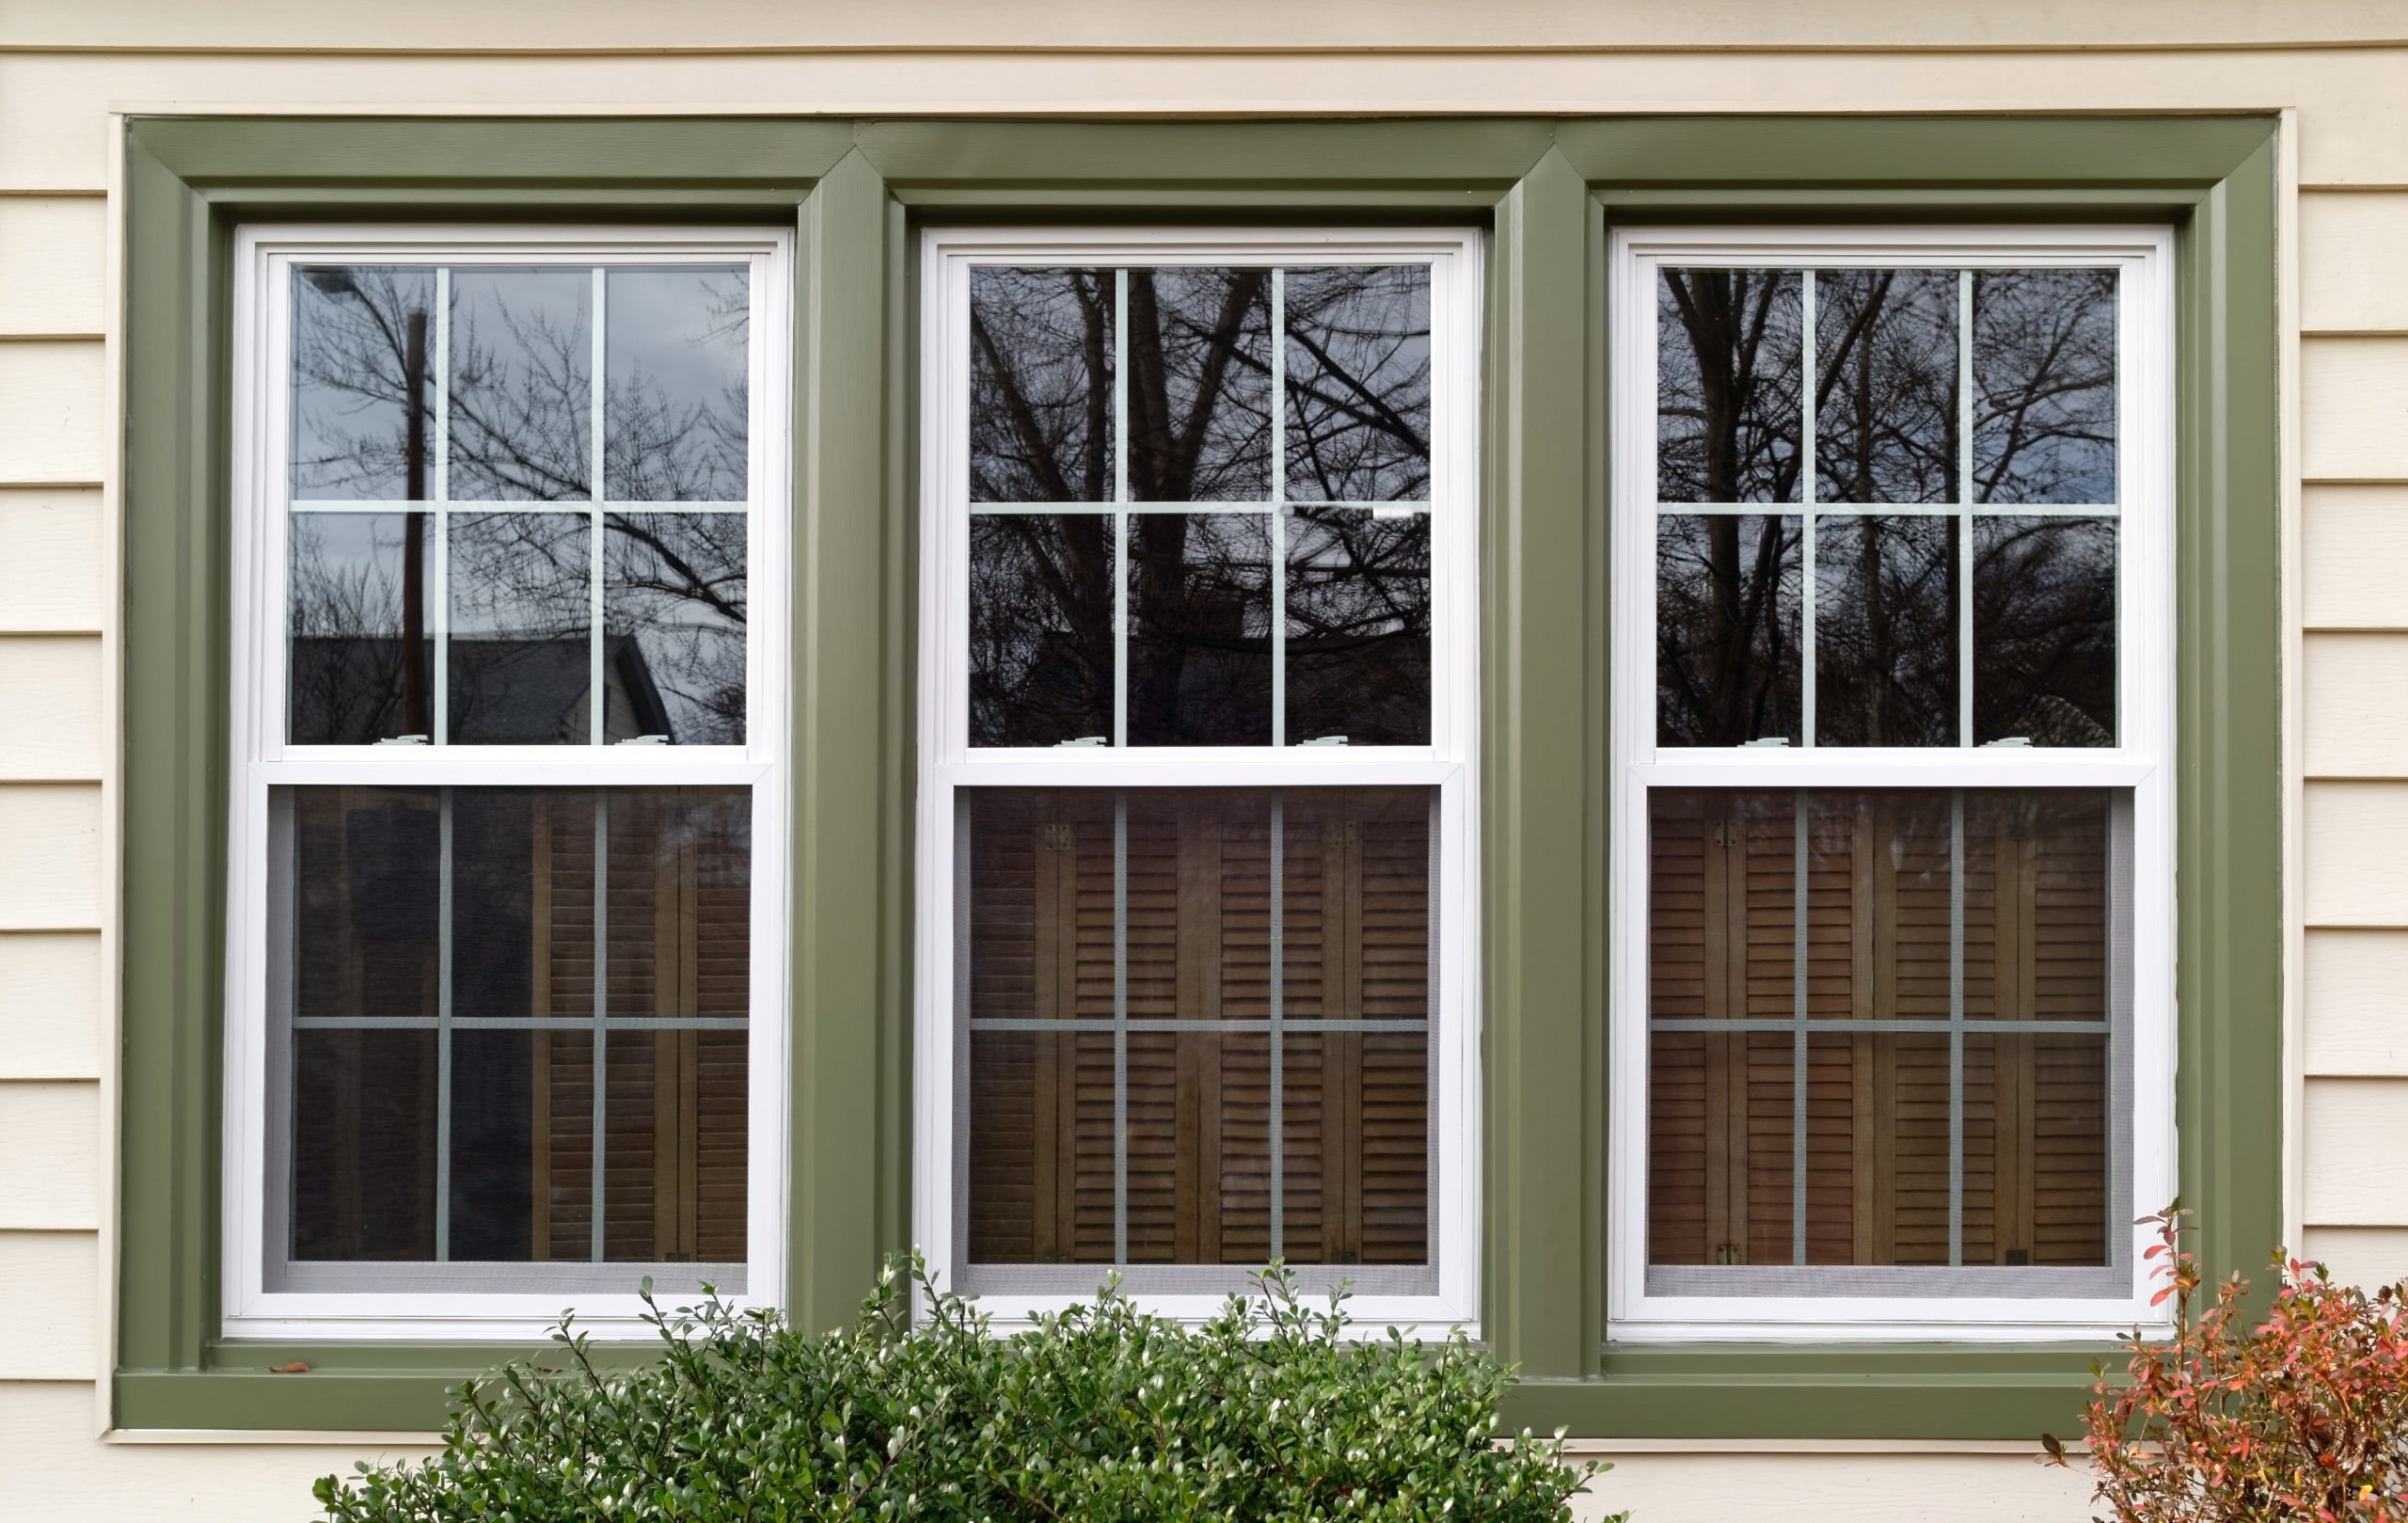 Three single-hung windows with green frames and white grids